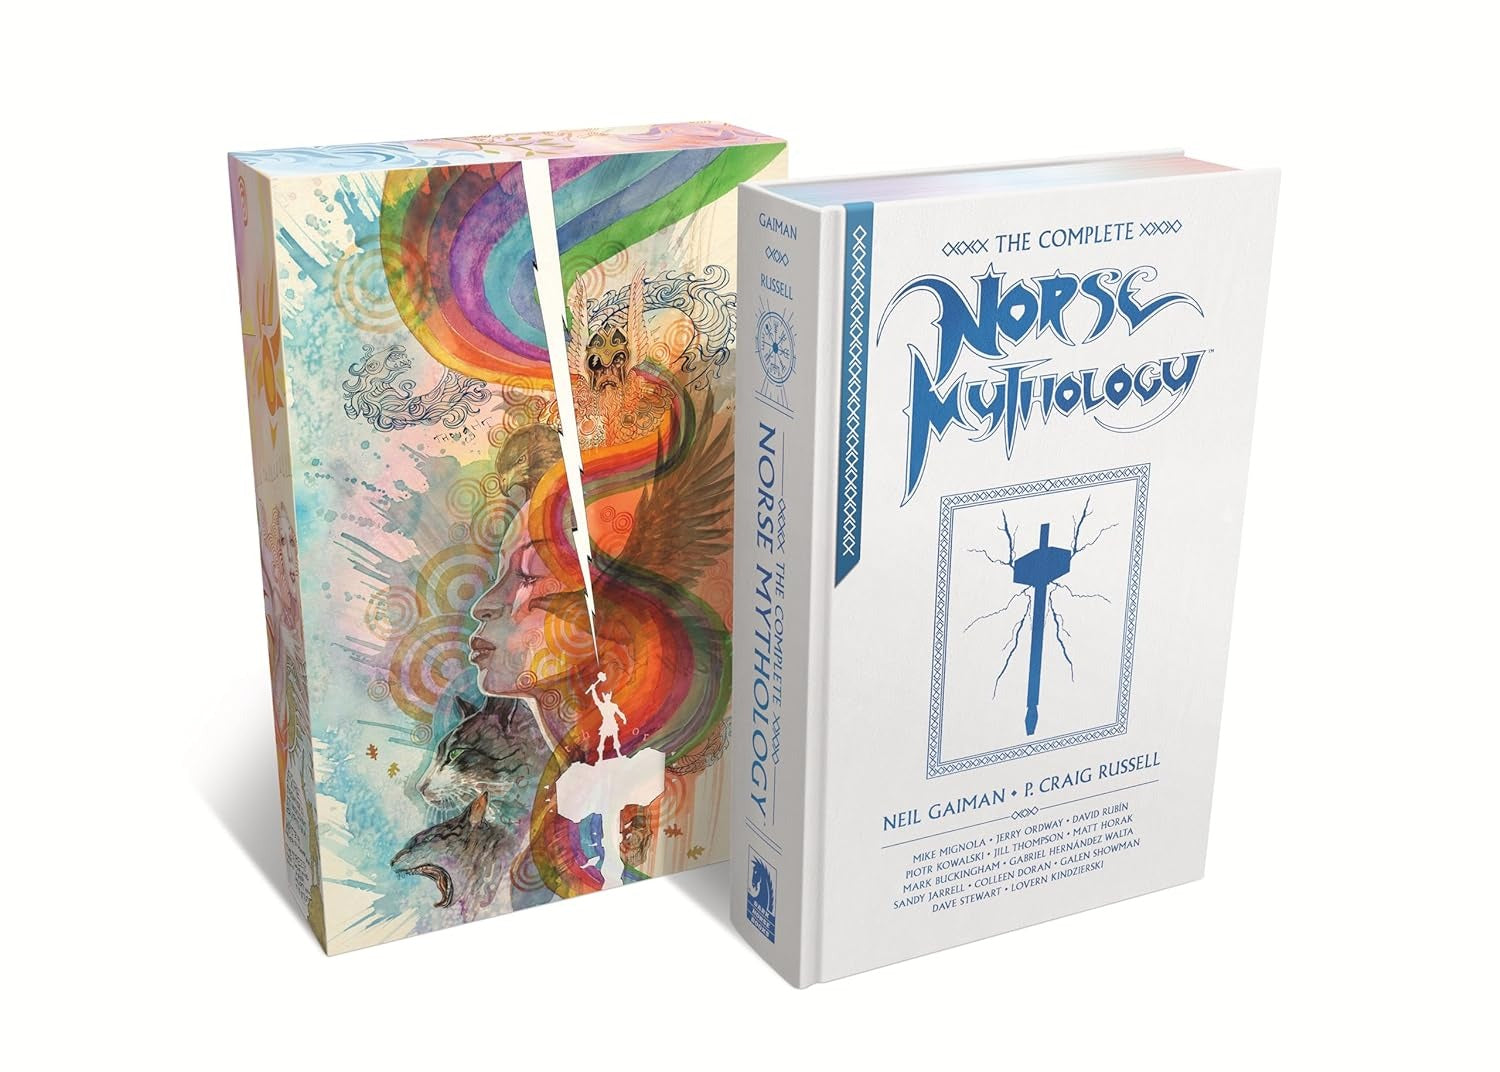 The Complete Norse Mythology (Graphic Novel) Slipcased Hardcover by Neil Gaiman (SHORT-TERM PREORDER)